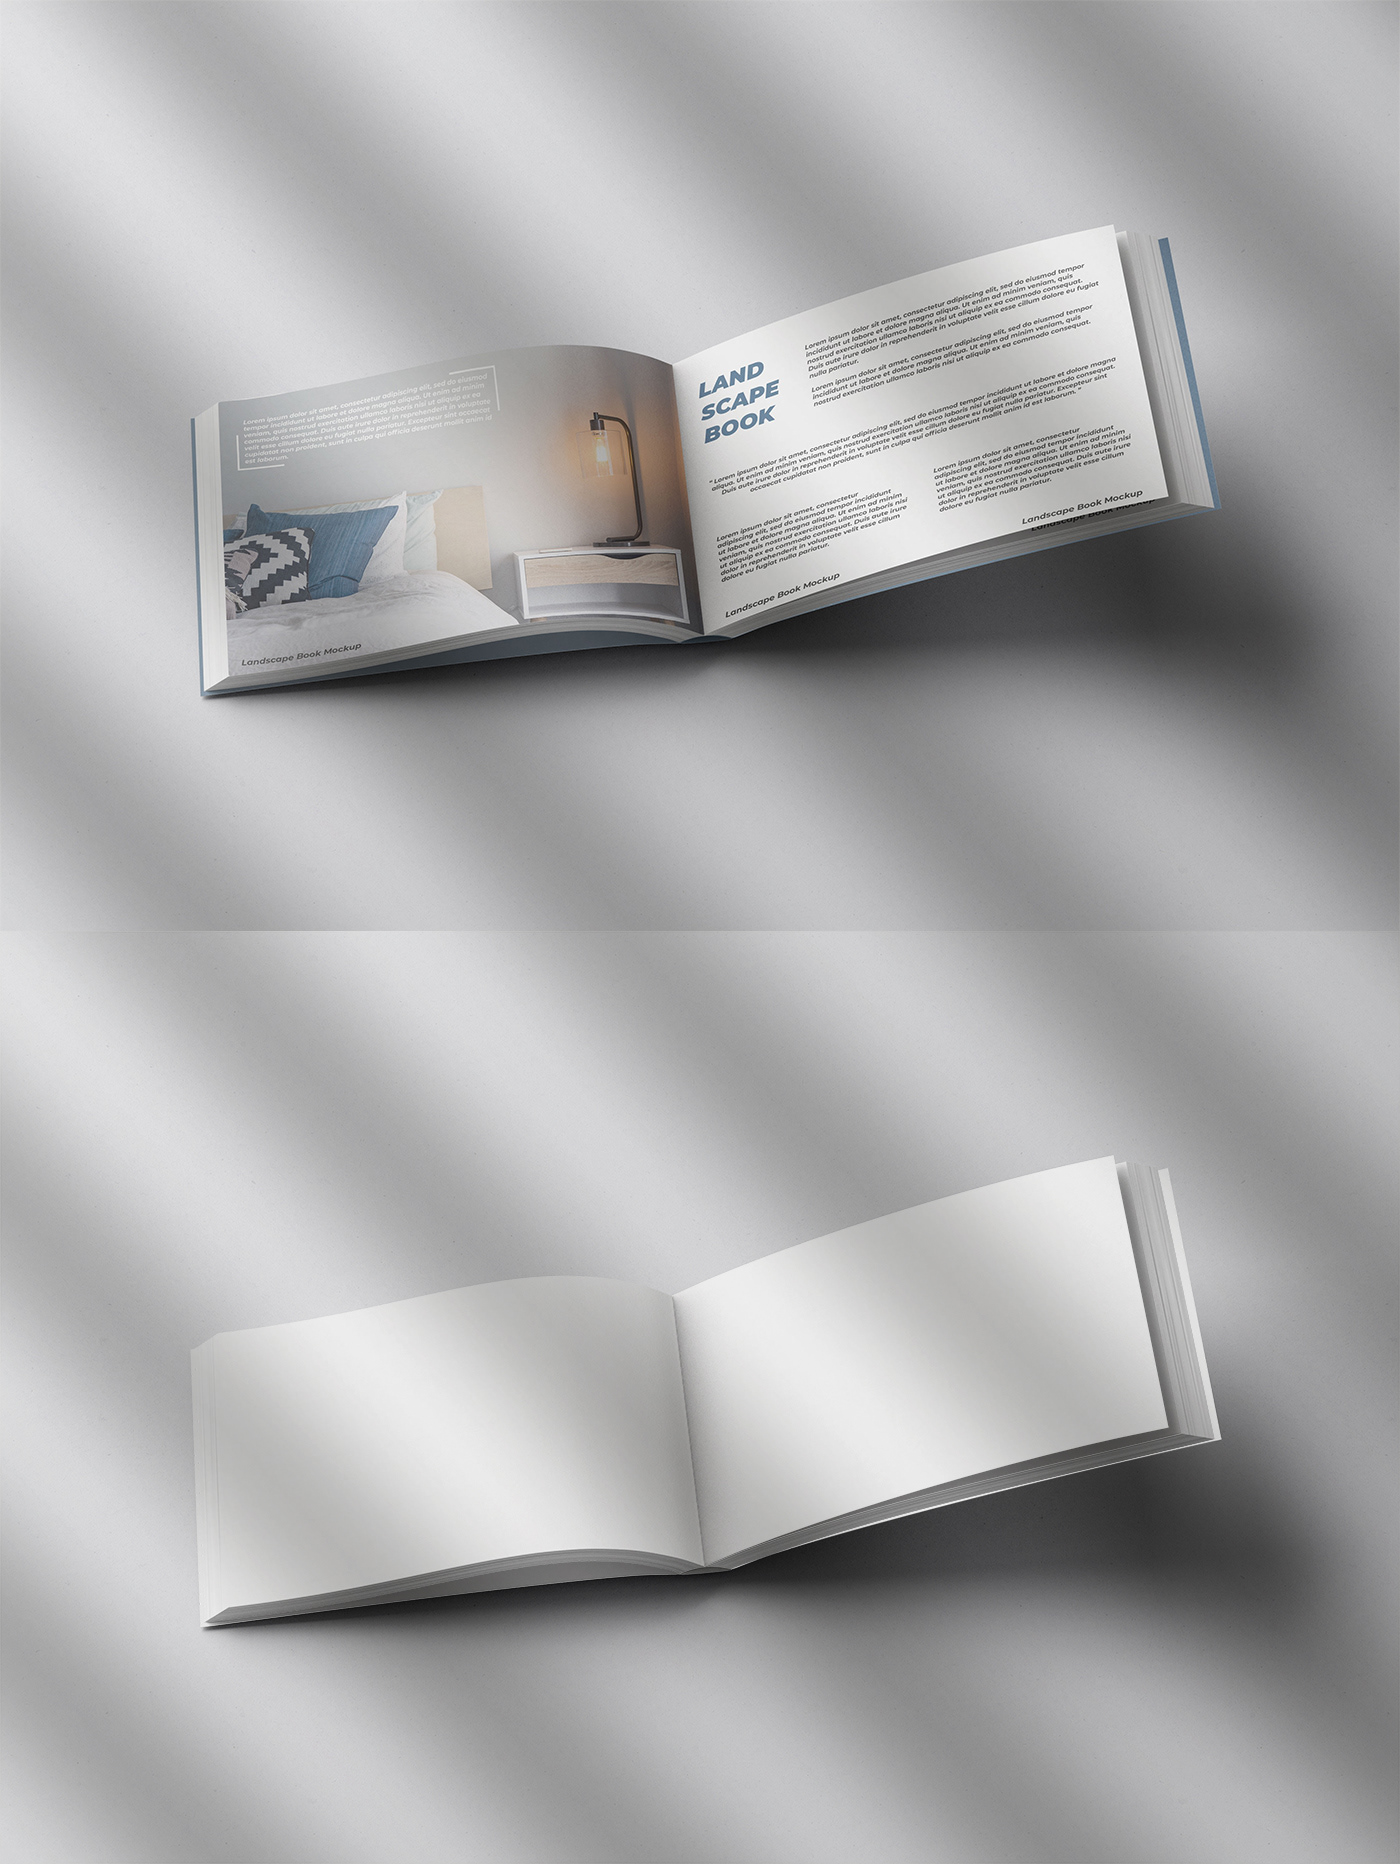 It is a modern and professional mockup created with a high-quality image to create presentation.